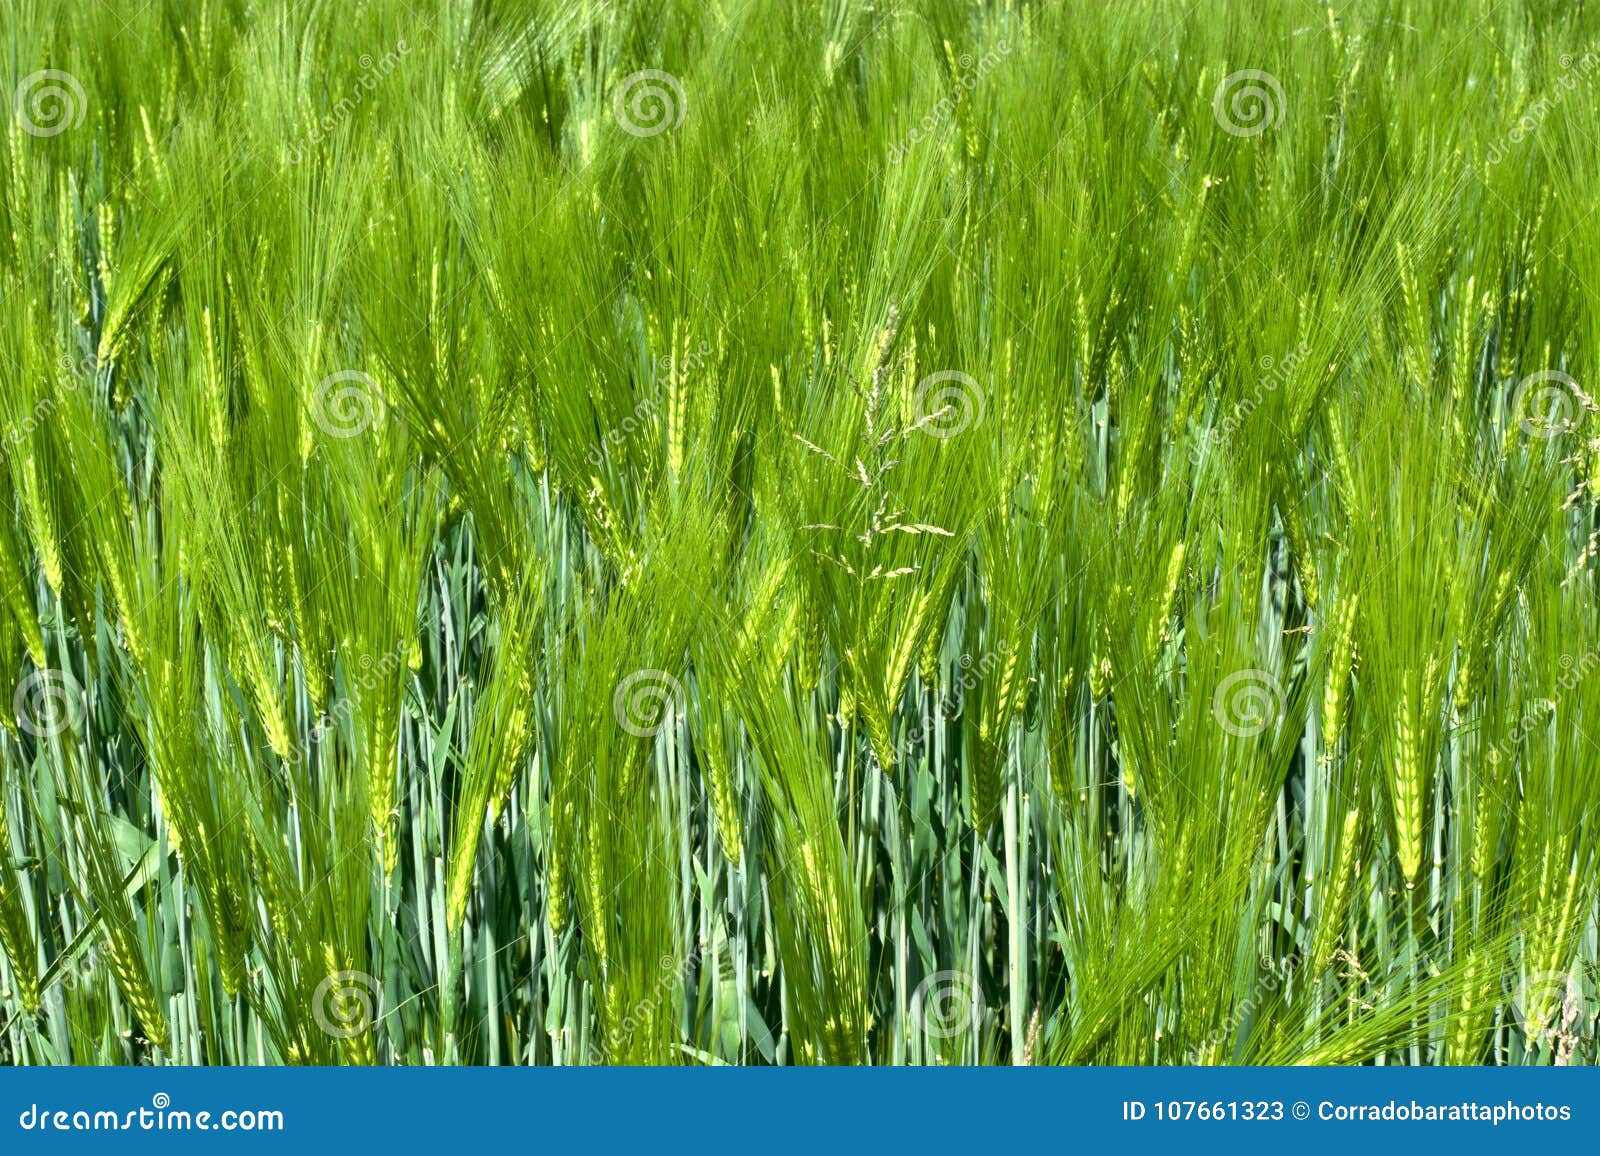 a wheat field at springtime